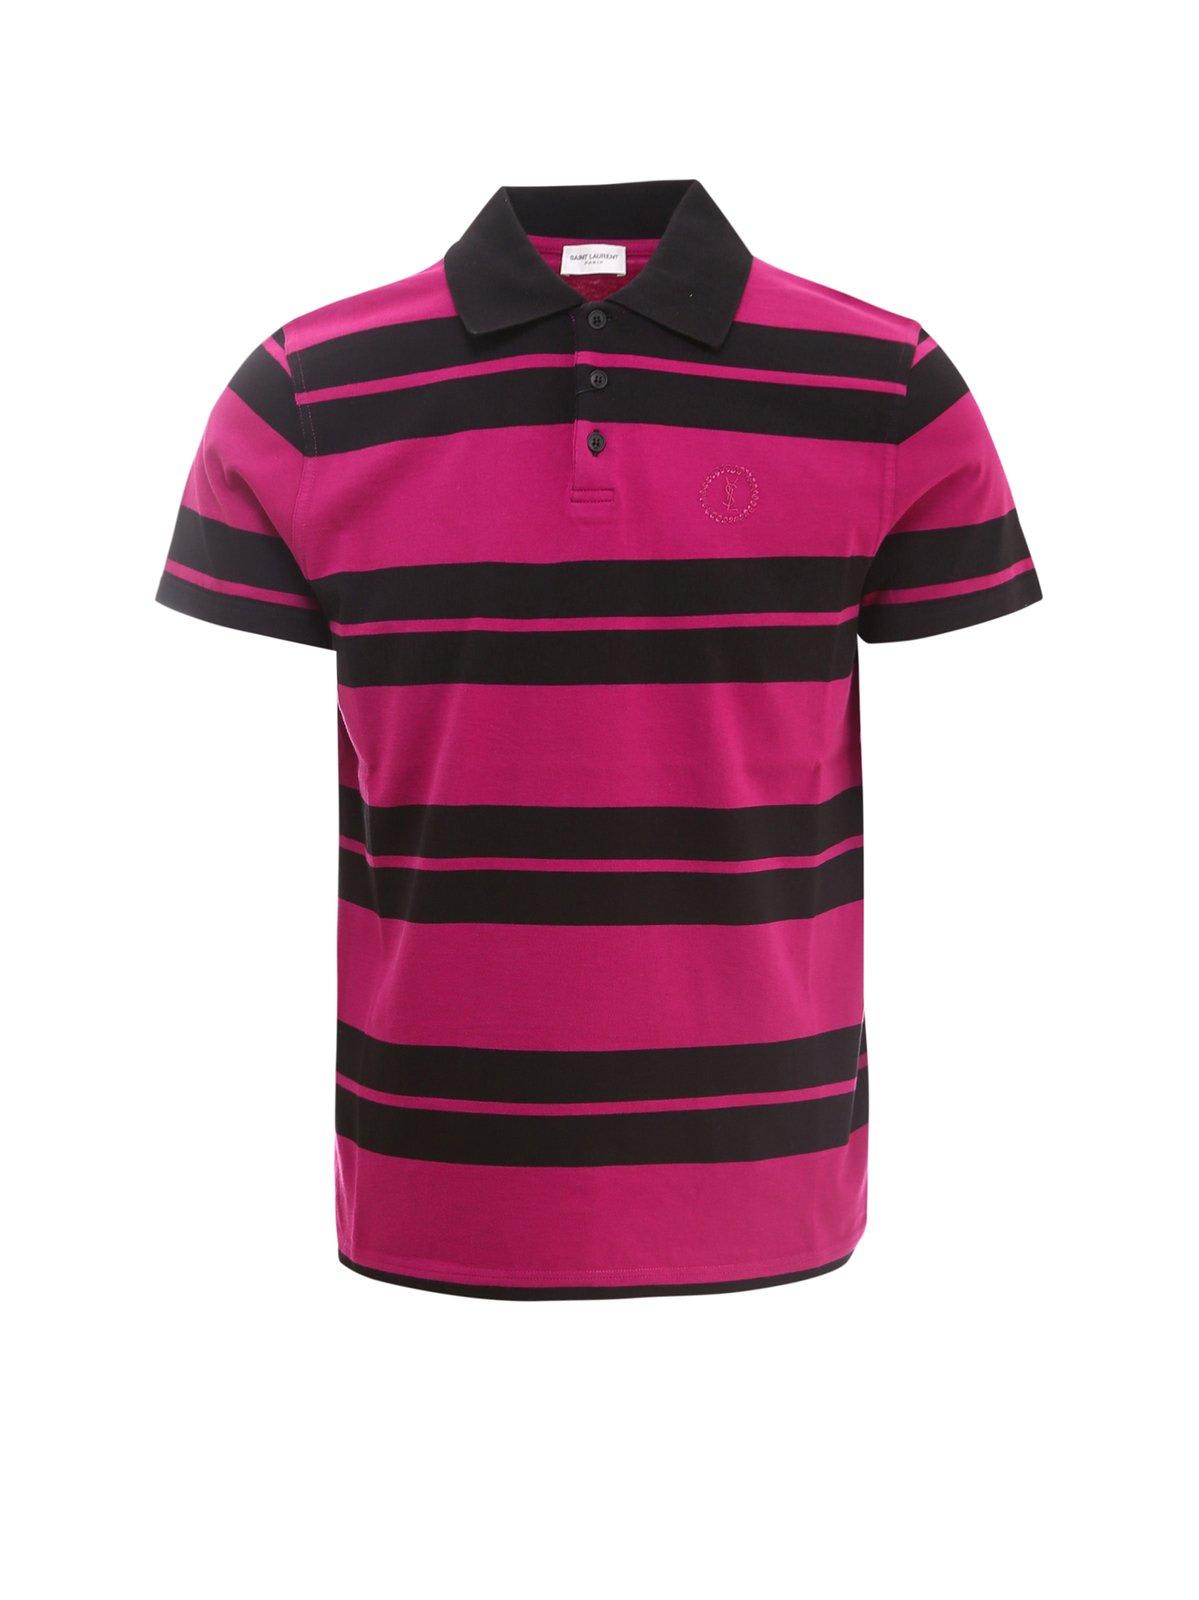 Men's Ysl Striped Pique Polo Shirt In Pink